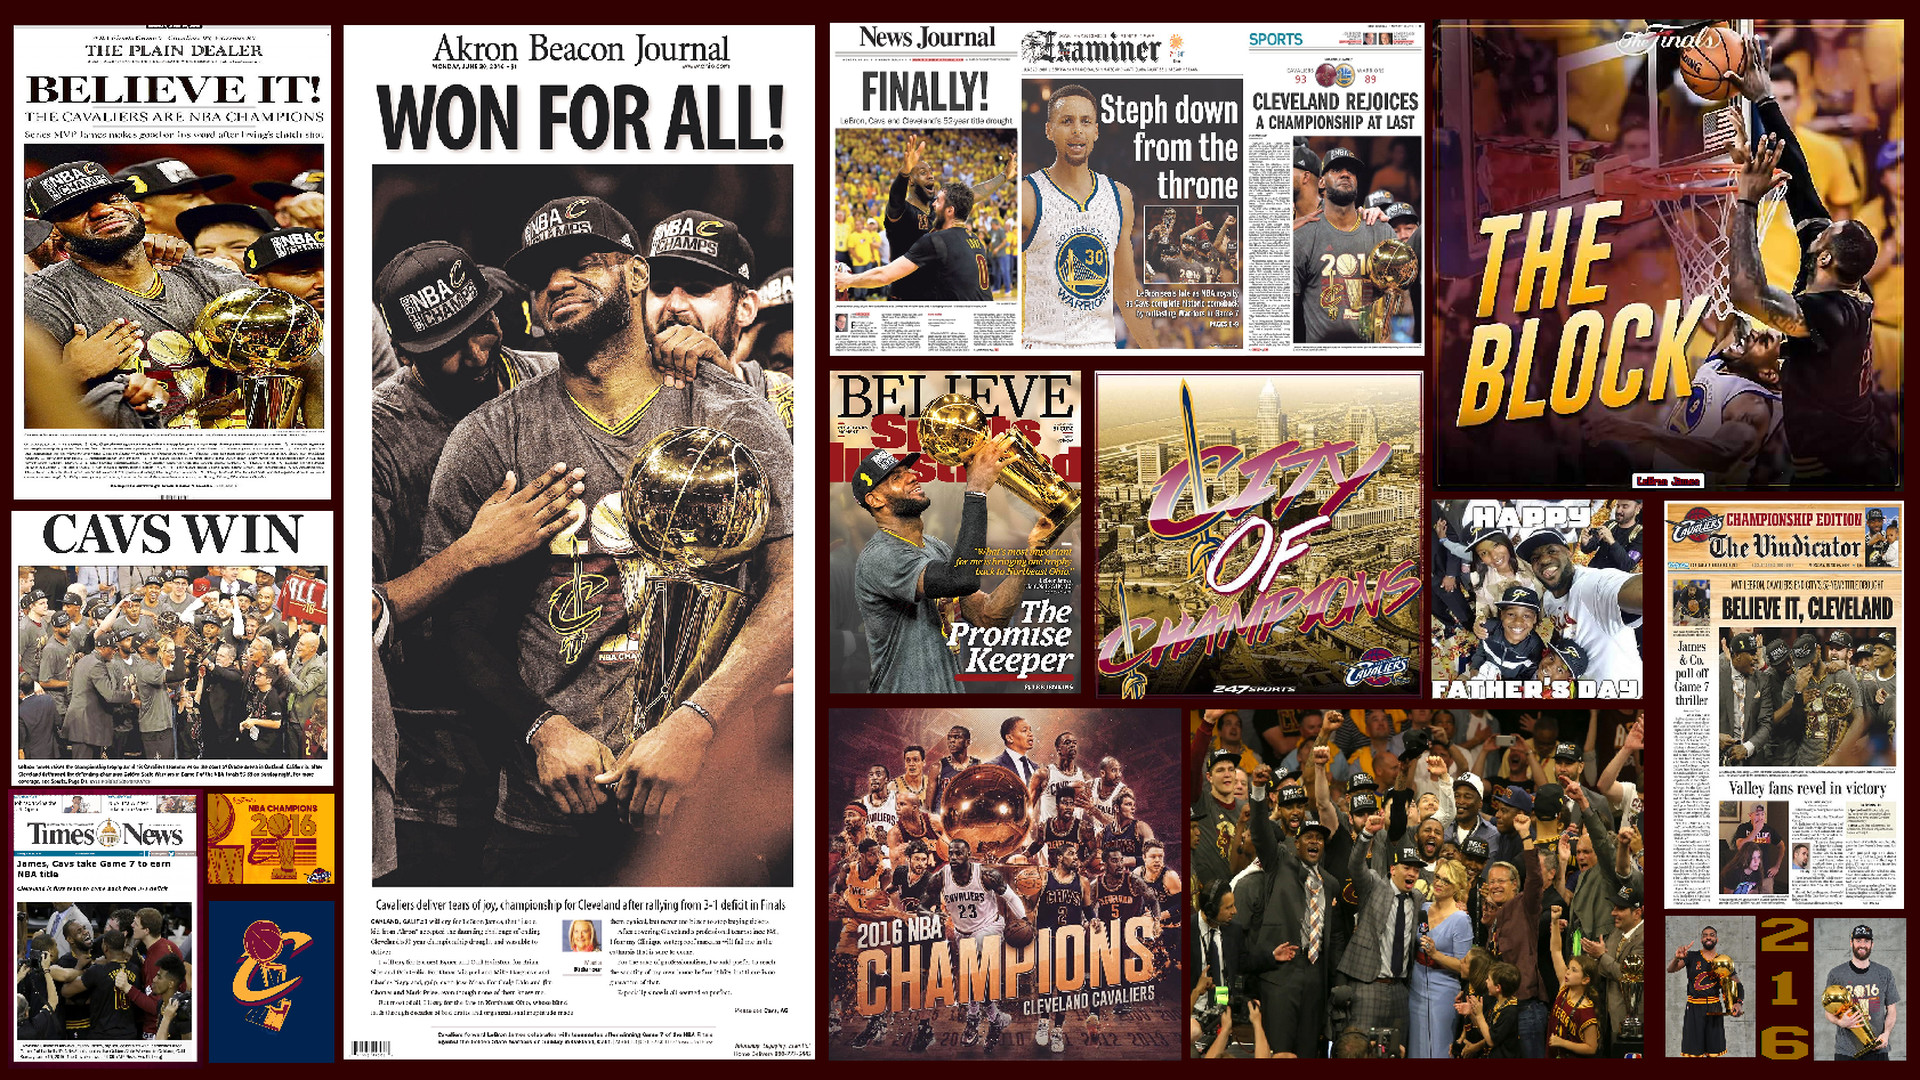 1920x1080 Cleveland Cavaliers images CLEVELAND CAVALIERS 2016 NBA CHAMPIONS HD  wallpaper and background photos